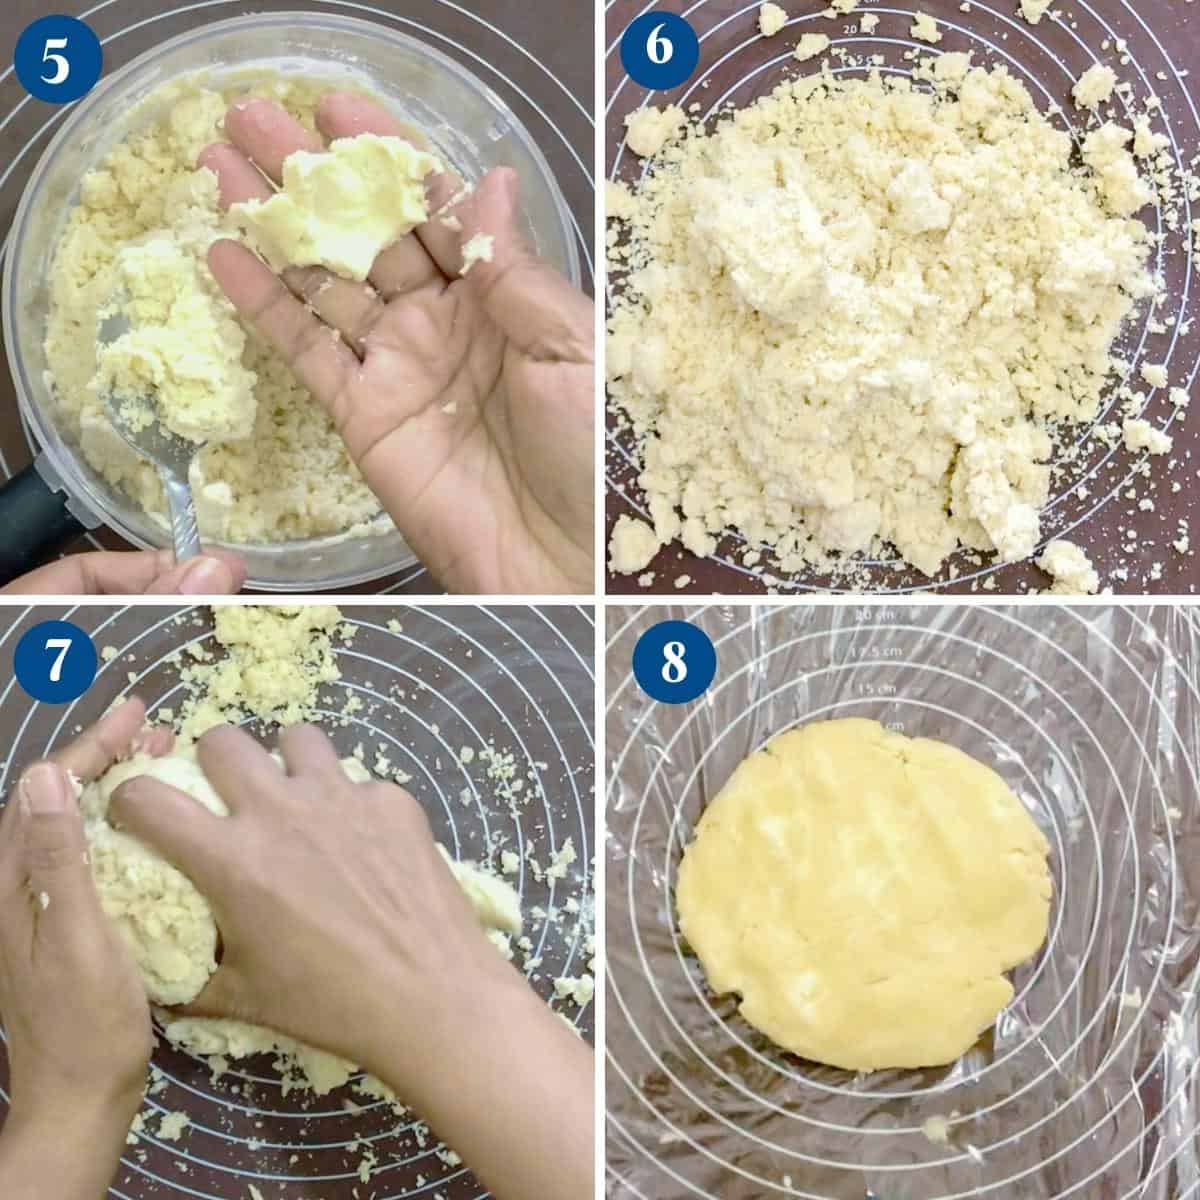 Progress pictures collage showing how to make a quiche dough.